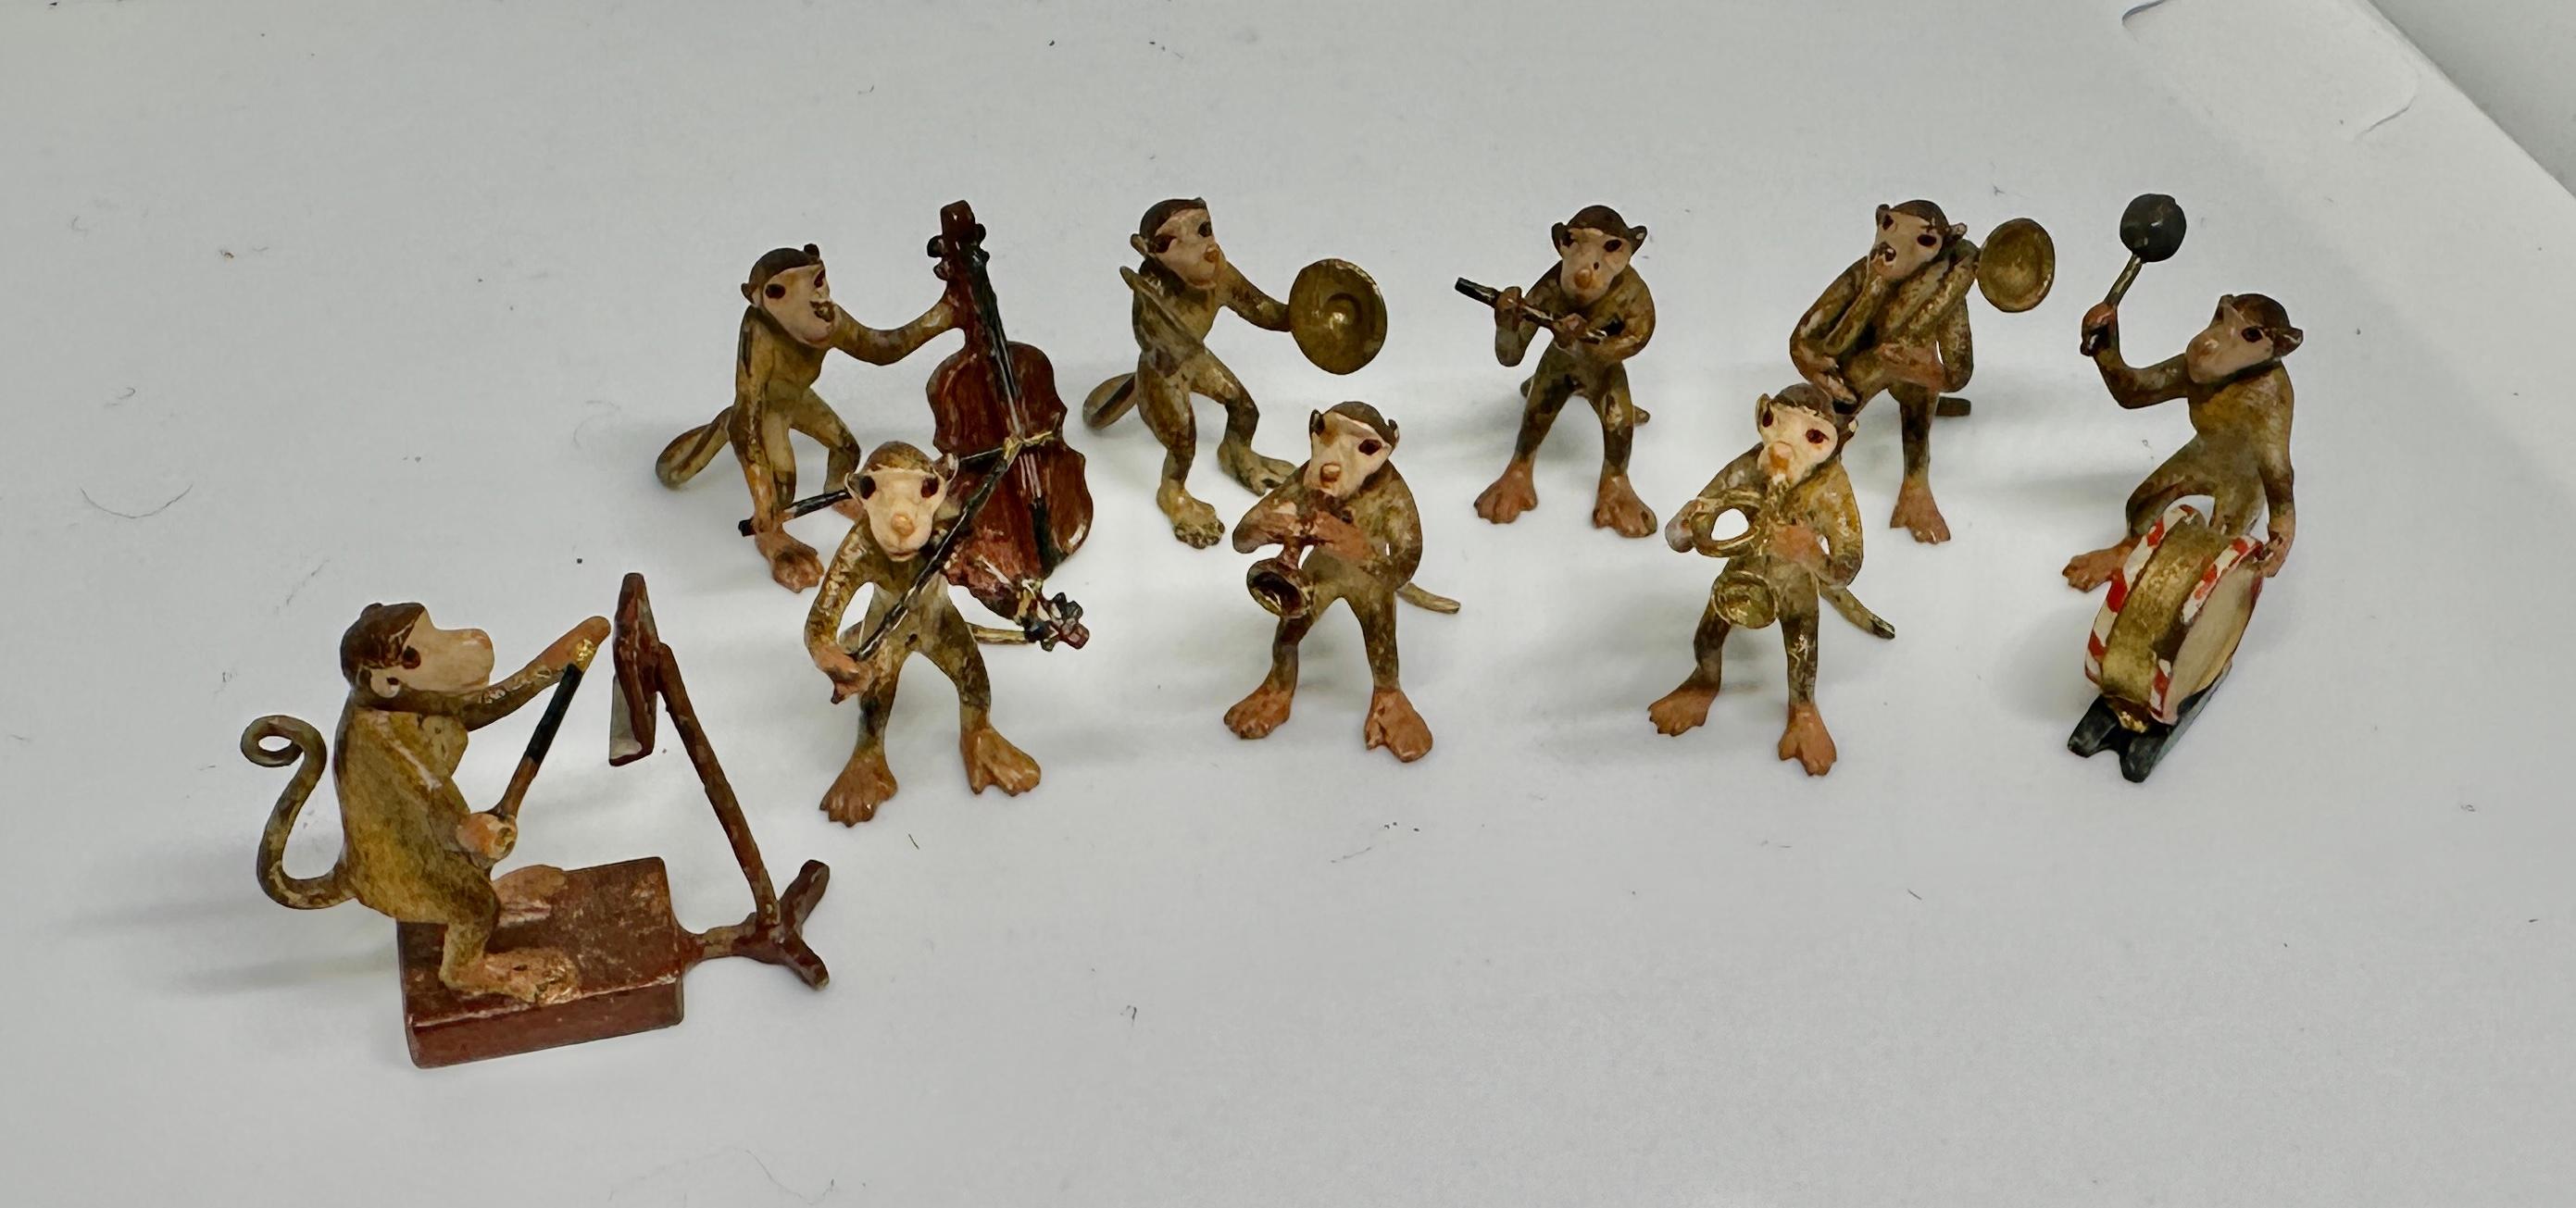 THIS IS A RARE MONKEY BAND WITH NINE PLAYERS AND CONDUCTORS.  THE MONKEY MUSICIANS ARE ANTIQUE AUSTRIAN VIENNA BRONZES.  THE BAND INCLUDES THE CONDUCTOR WITH MUSIC STAND, DRUM, VIOLIN, TRUMPET, CELLO OR BASE, CYMBALS, FRENCH HORN OR TUBA AND